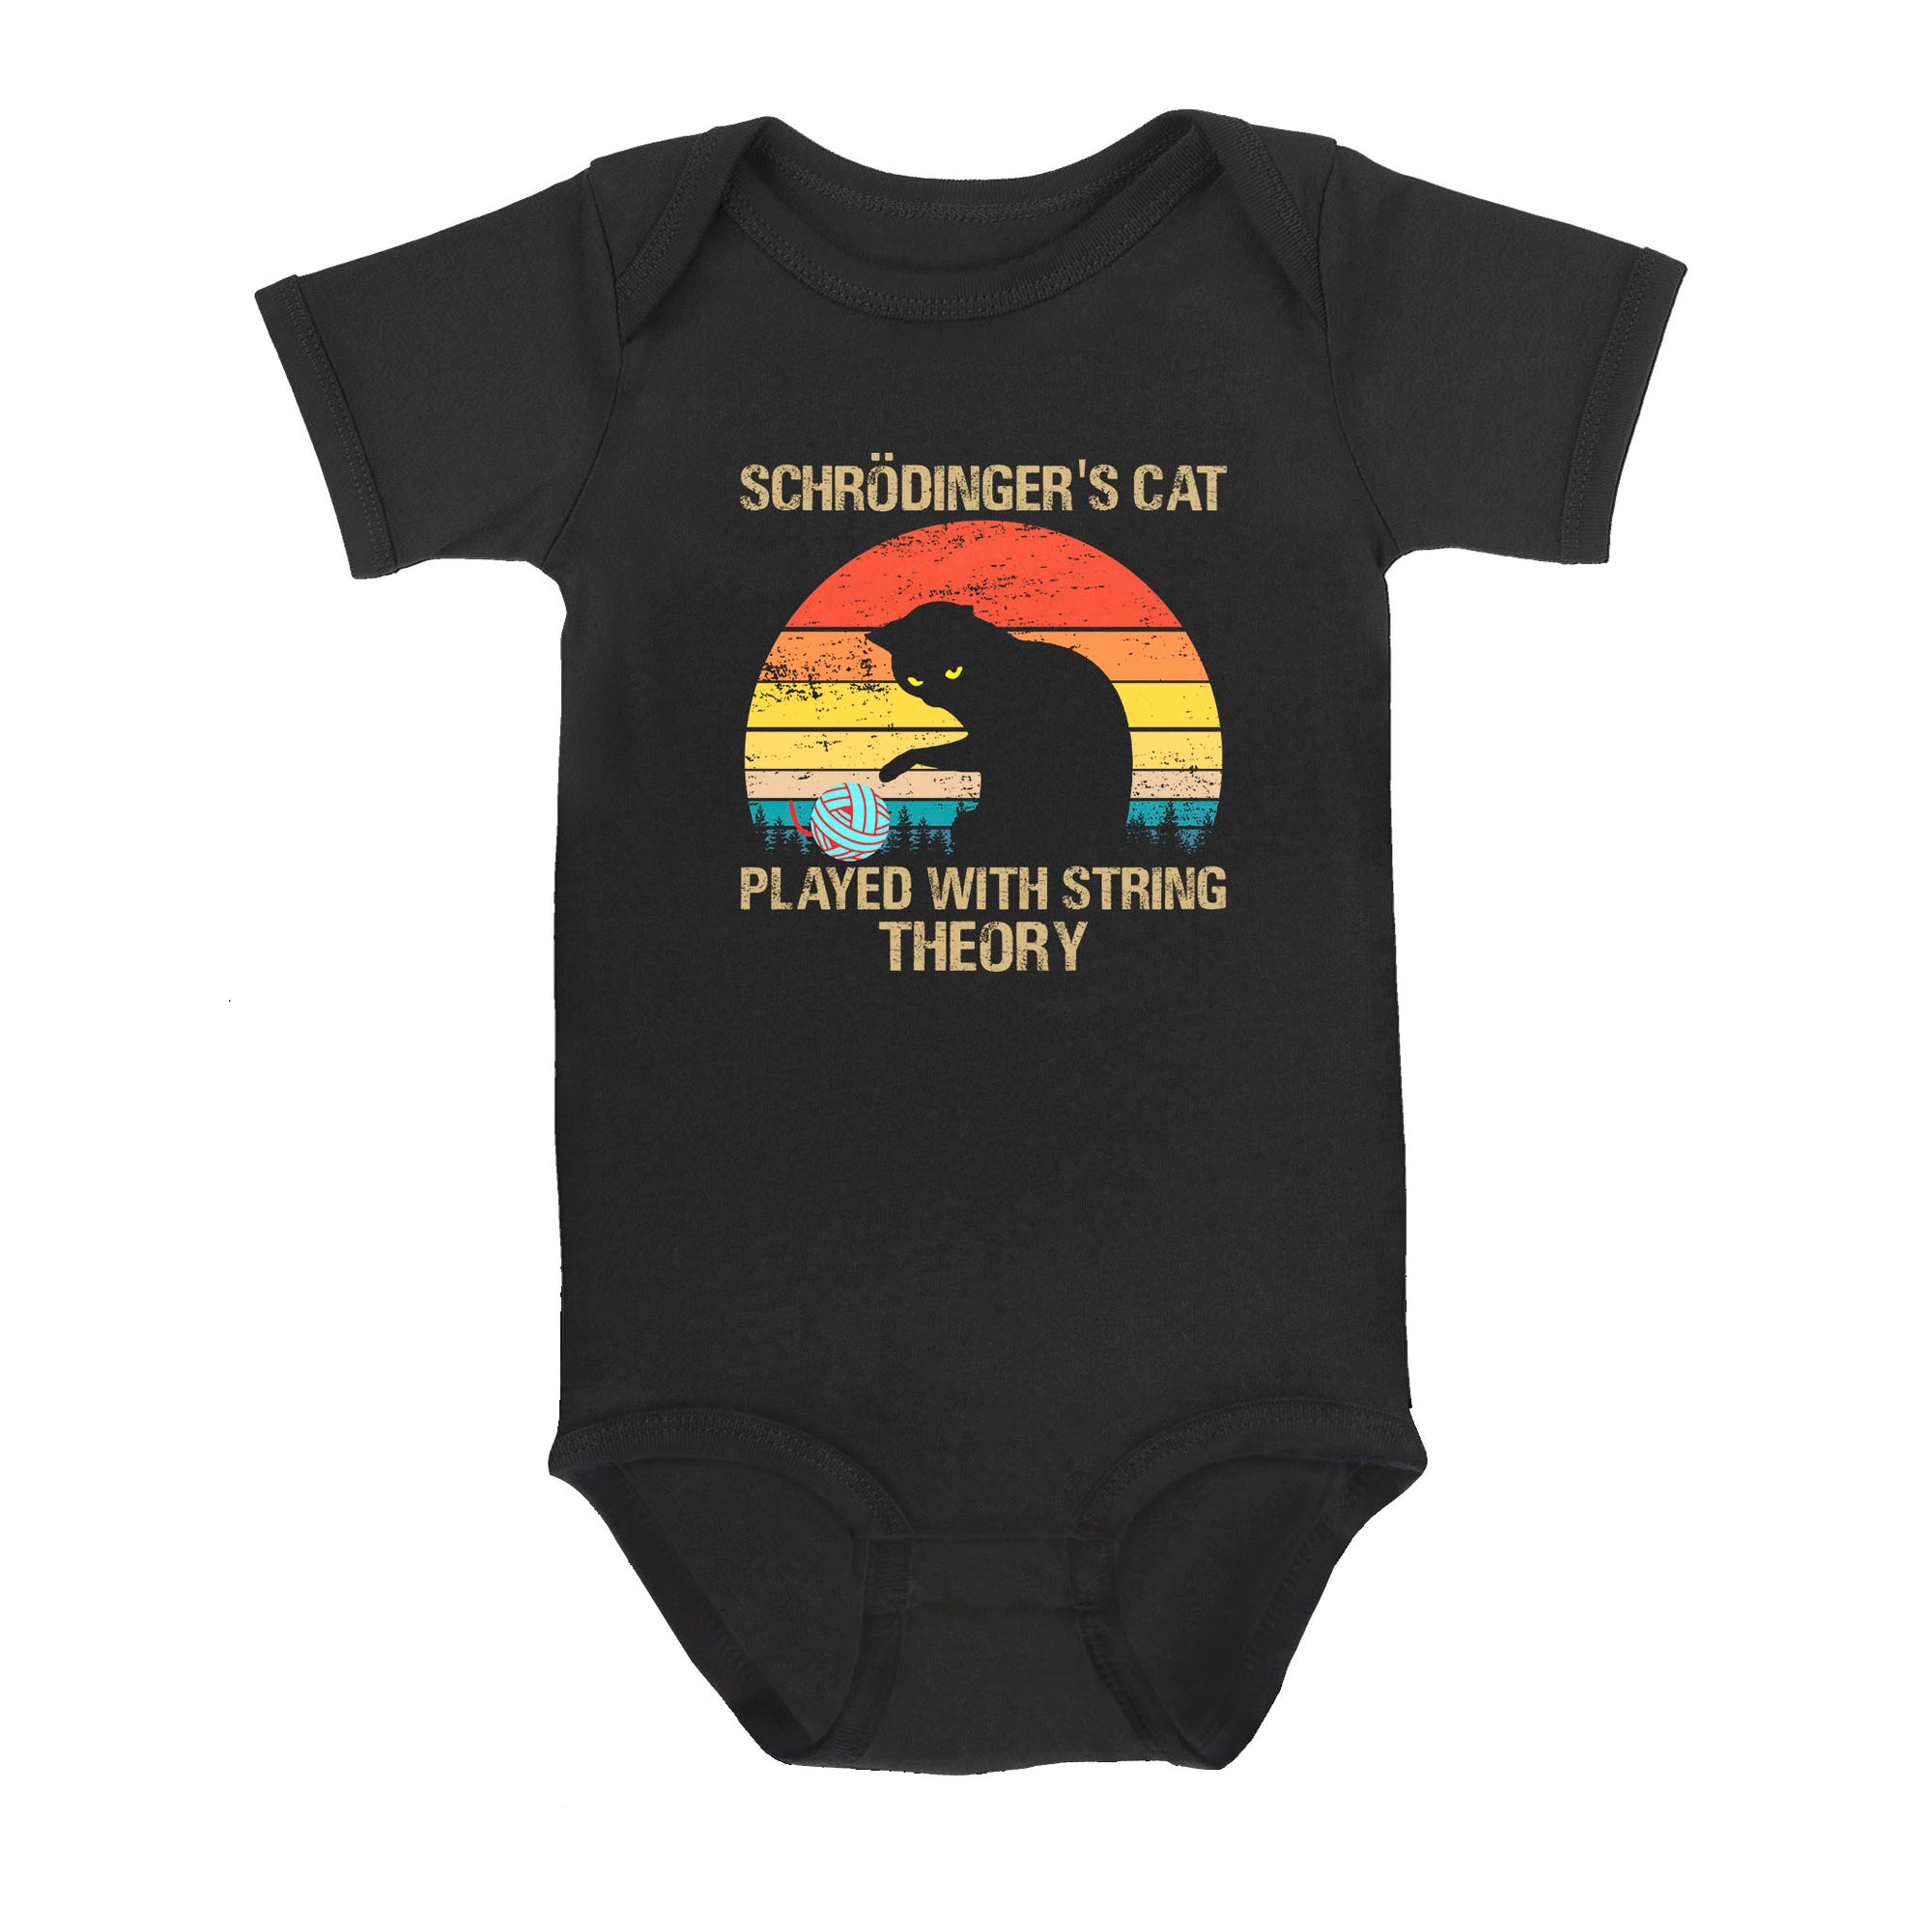 Schrodinger’s Cat Played With String Theory - Baby Onesie